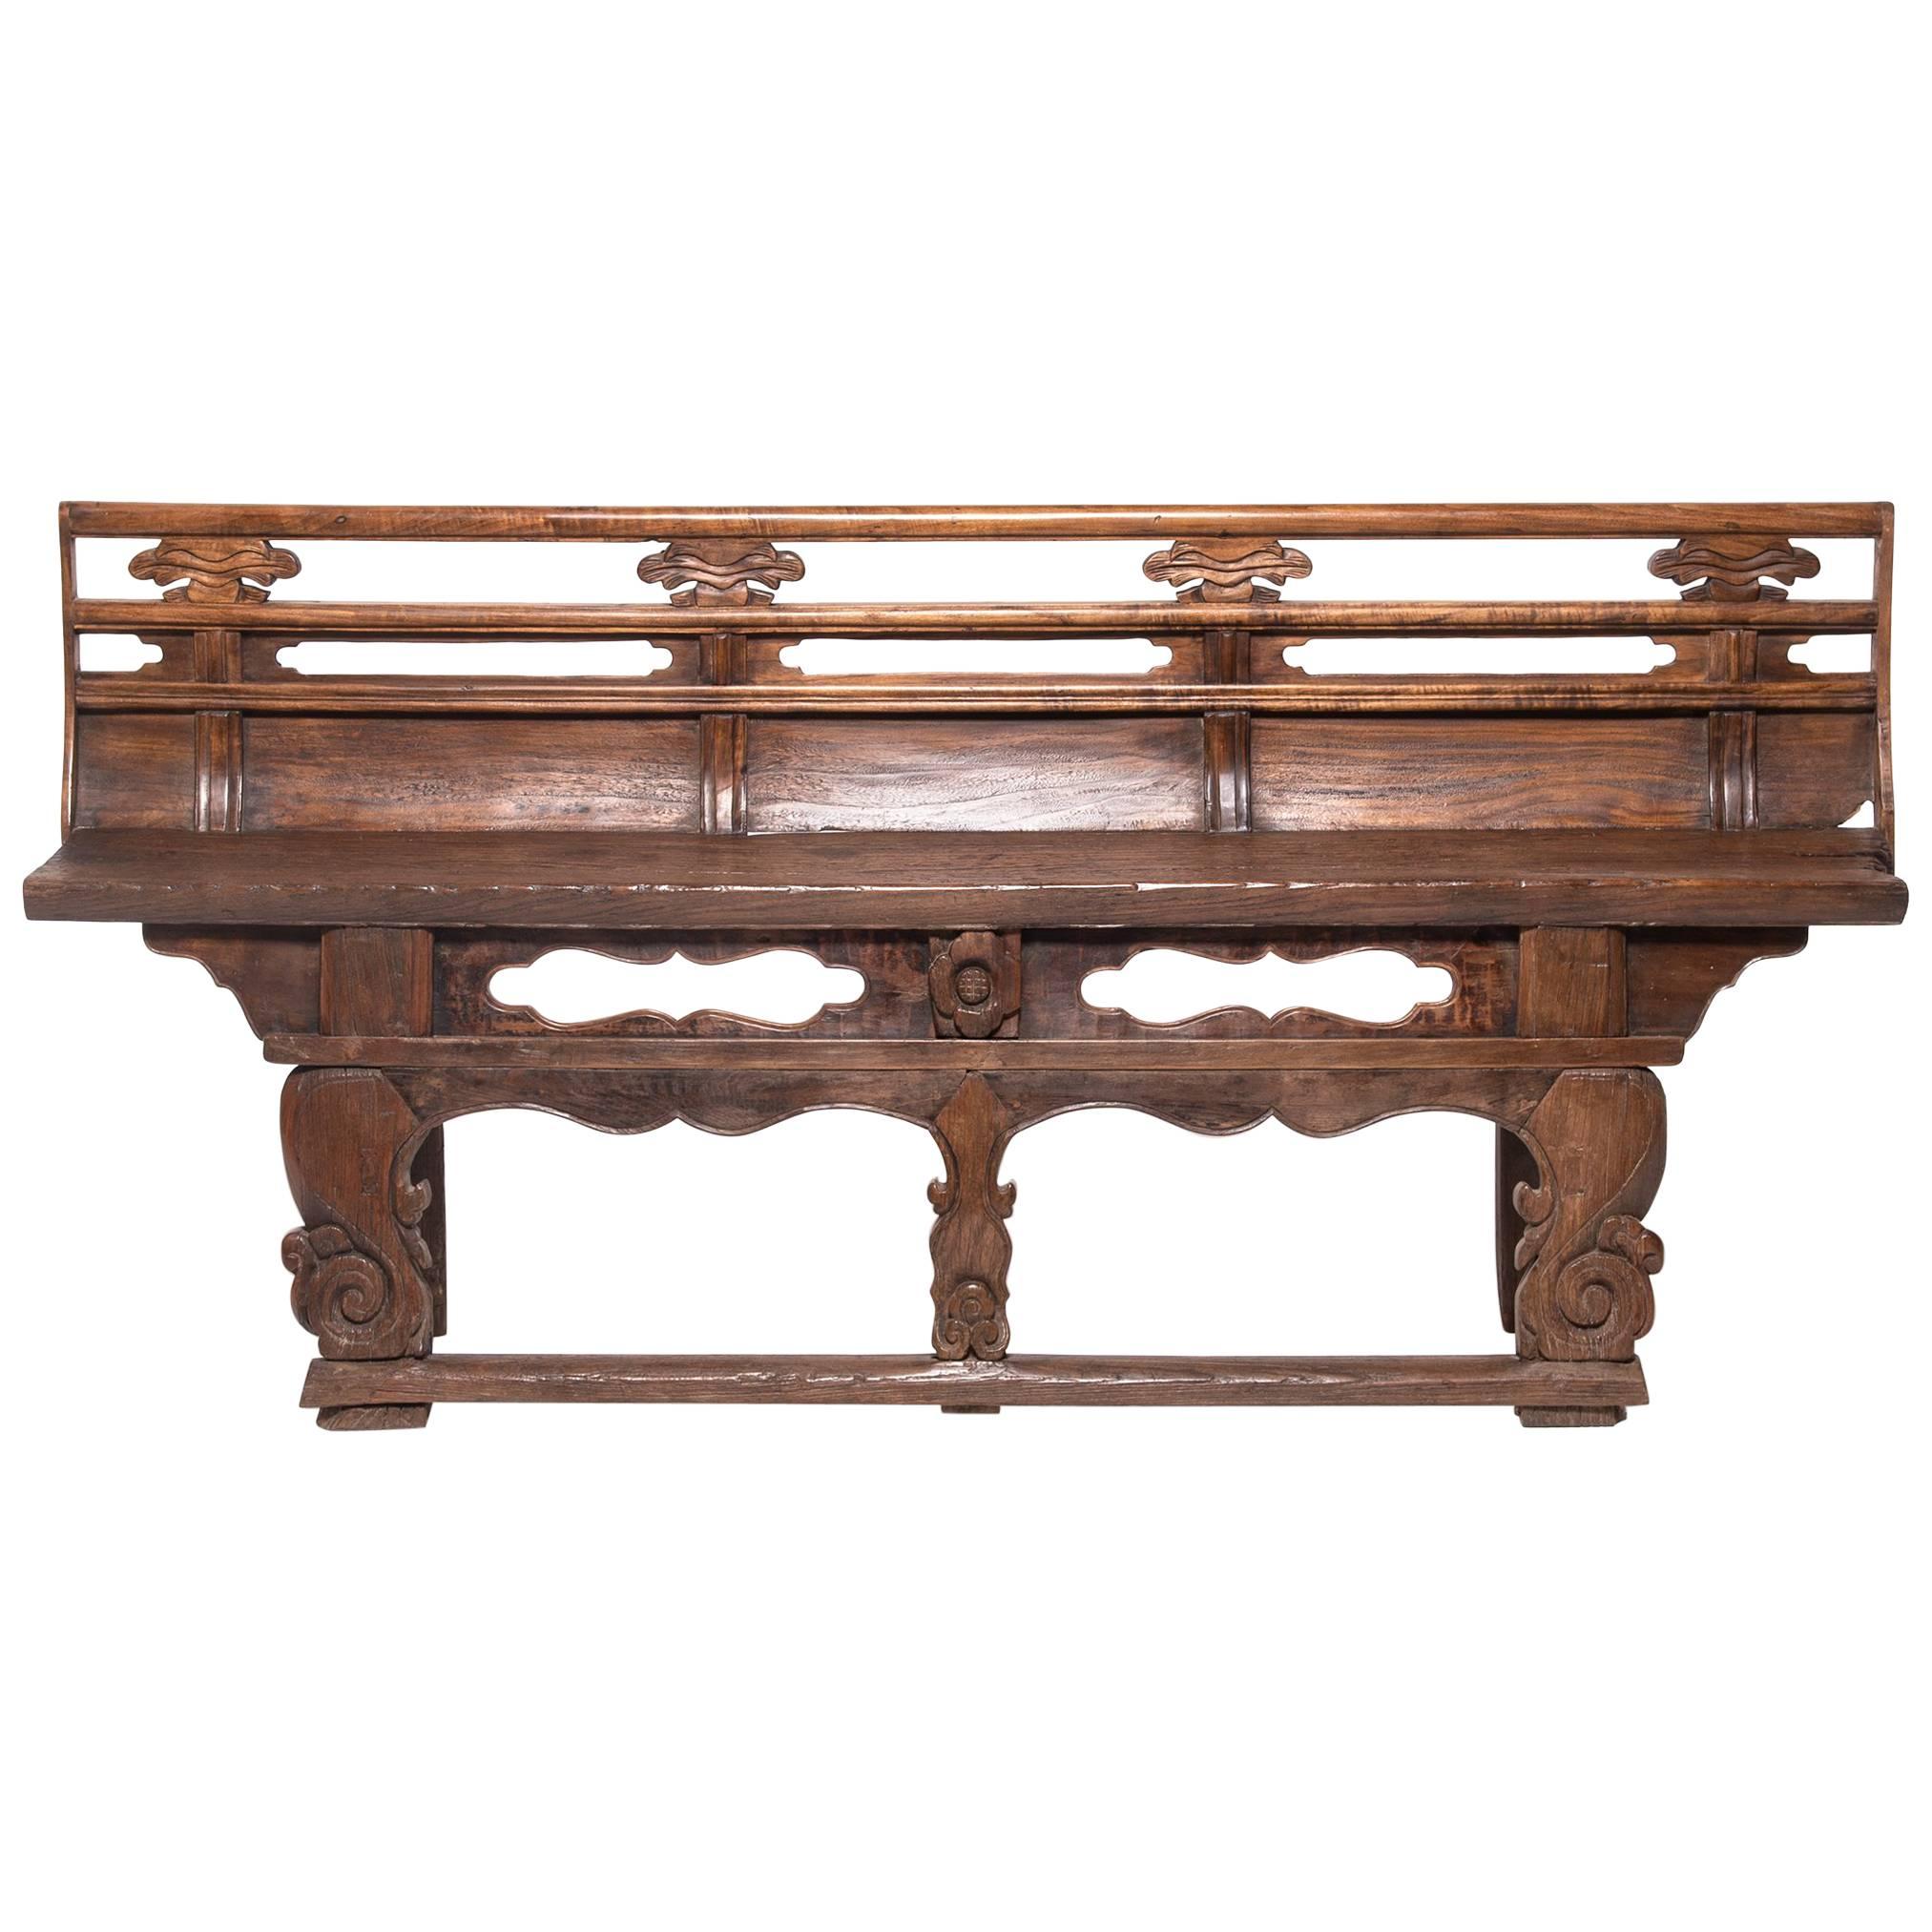 19th Century Chinese Carved Village Bench